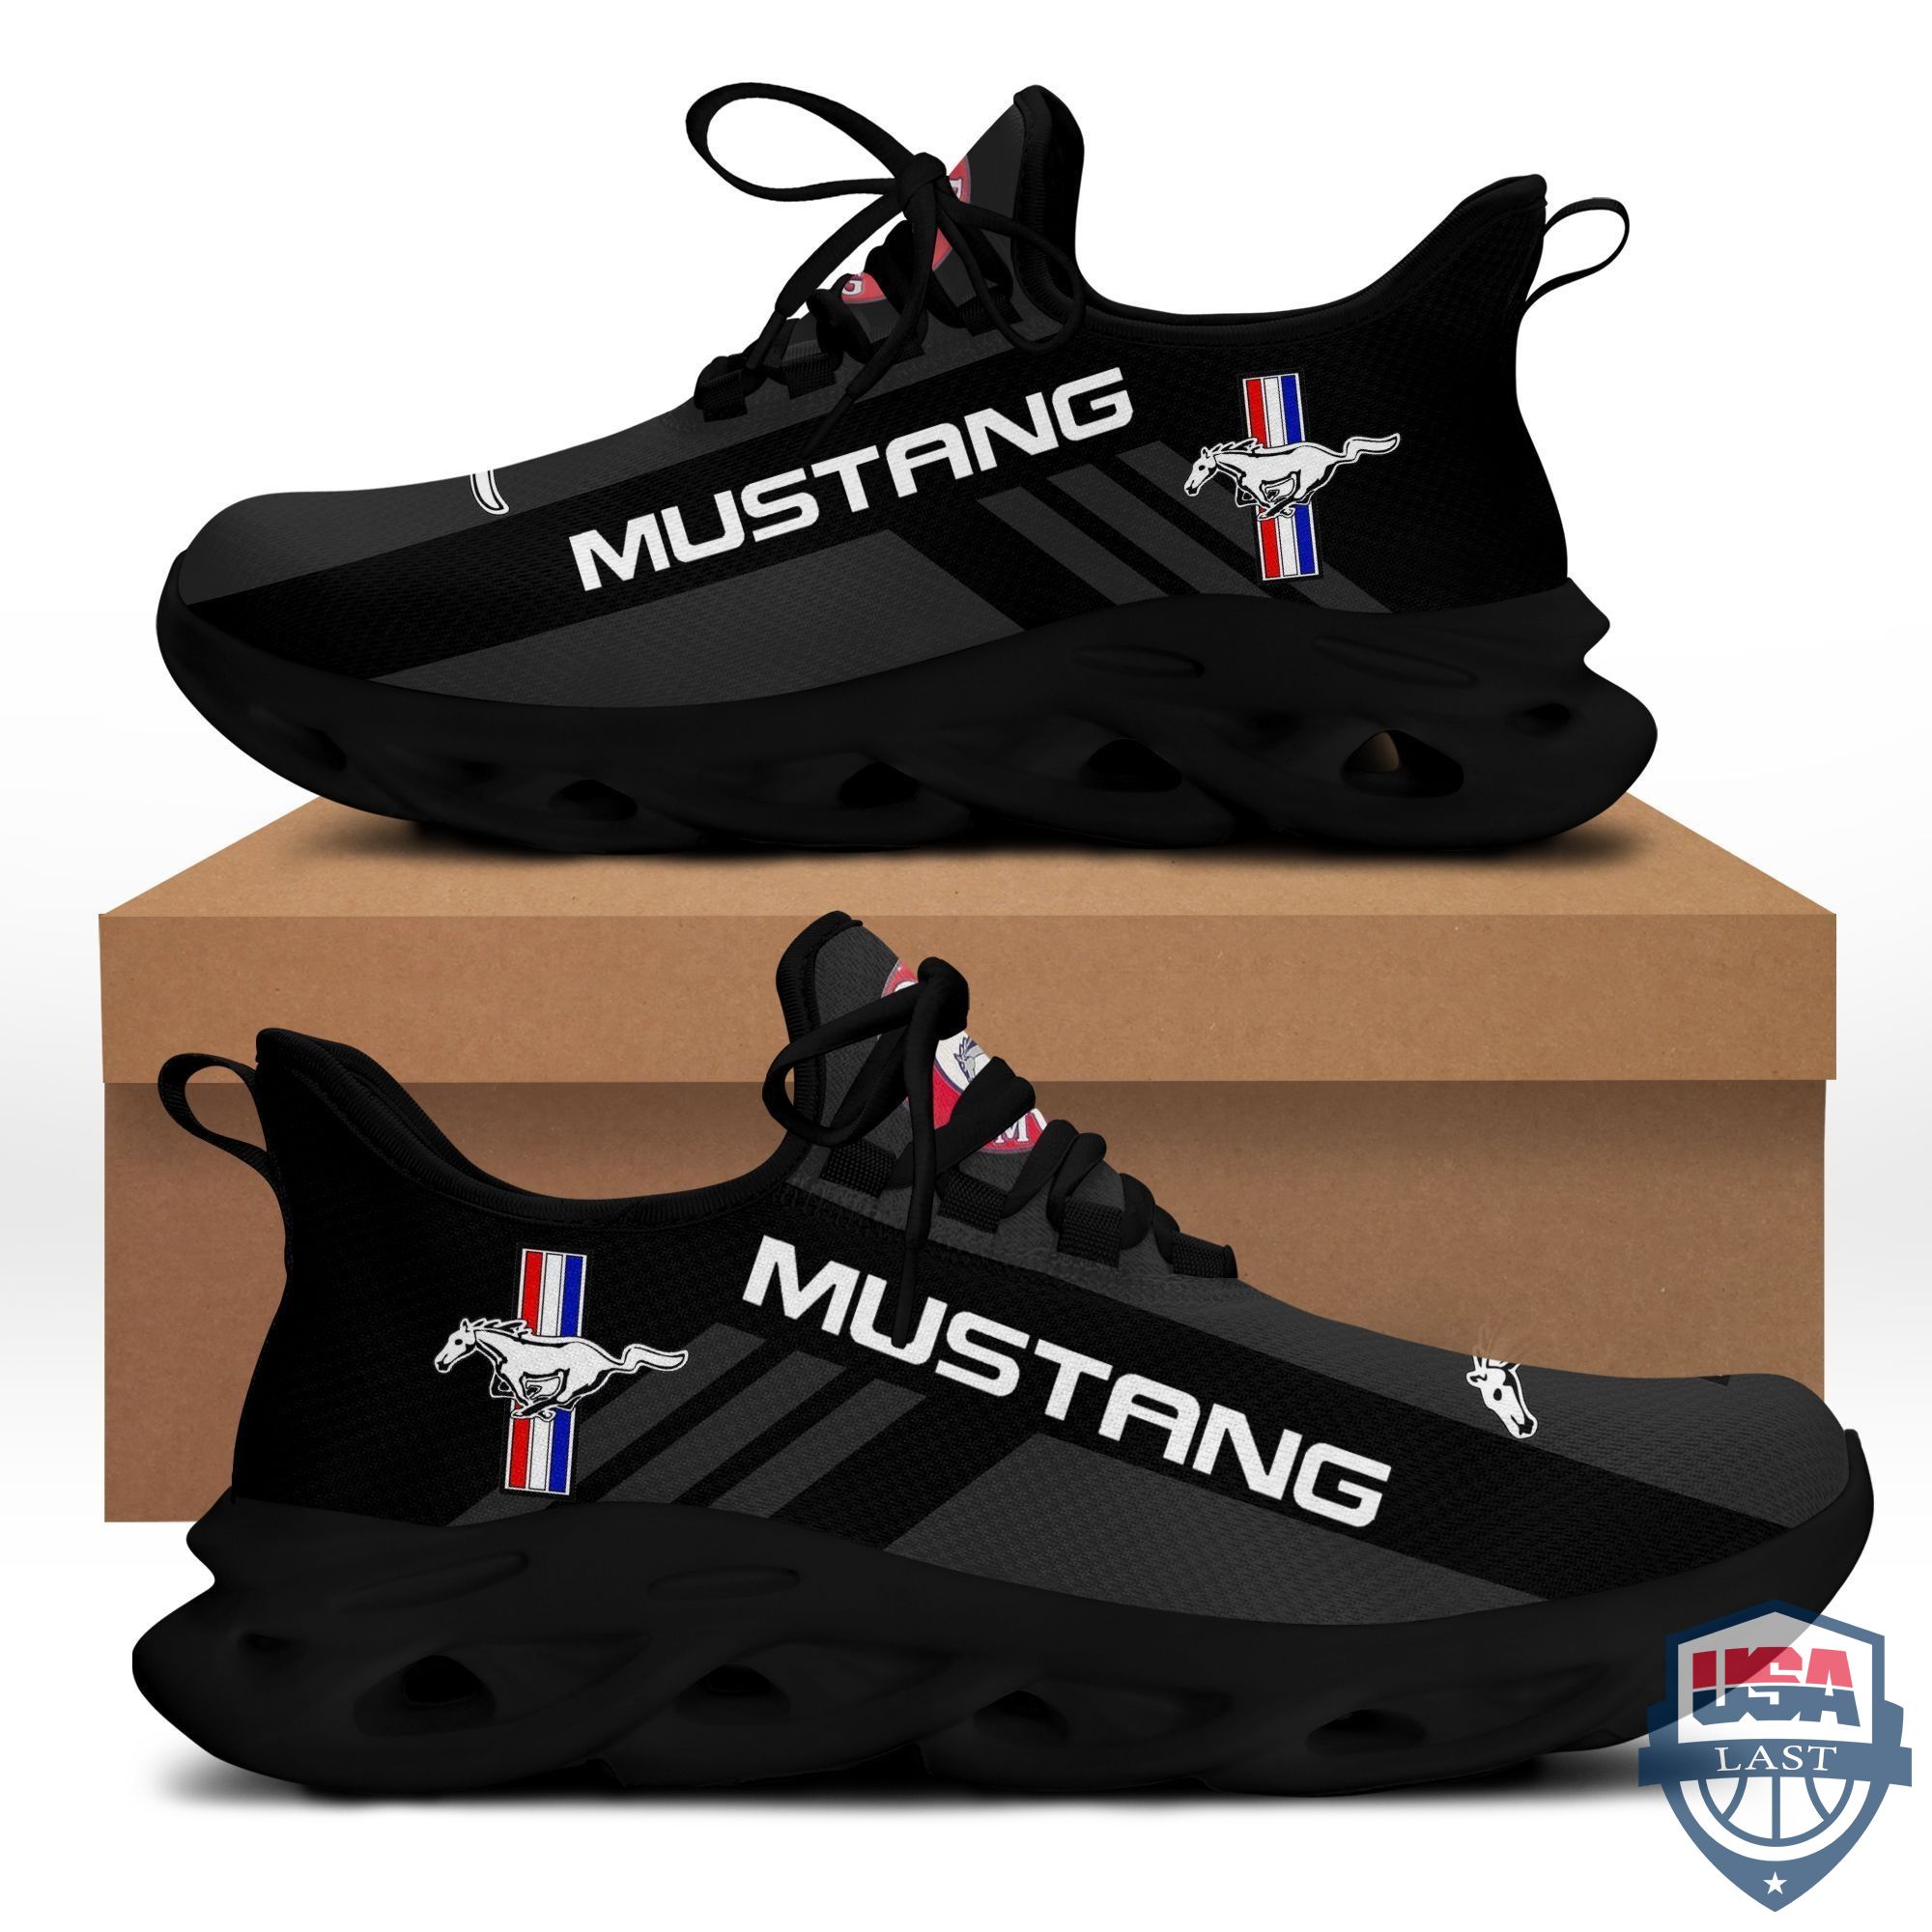 Ford mustang max soul shoes black version For Men, Women